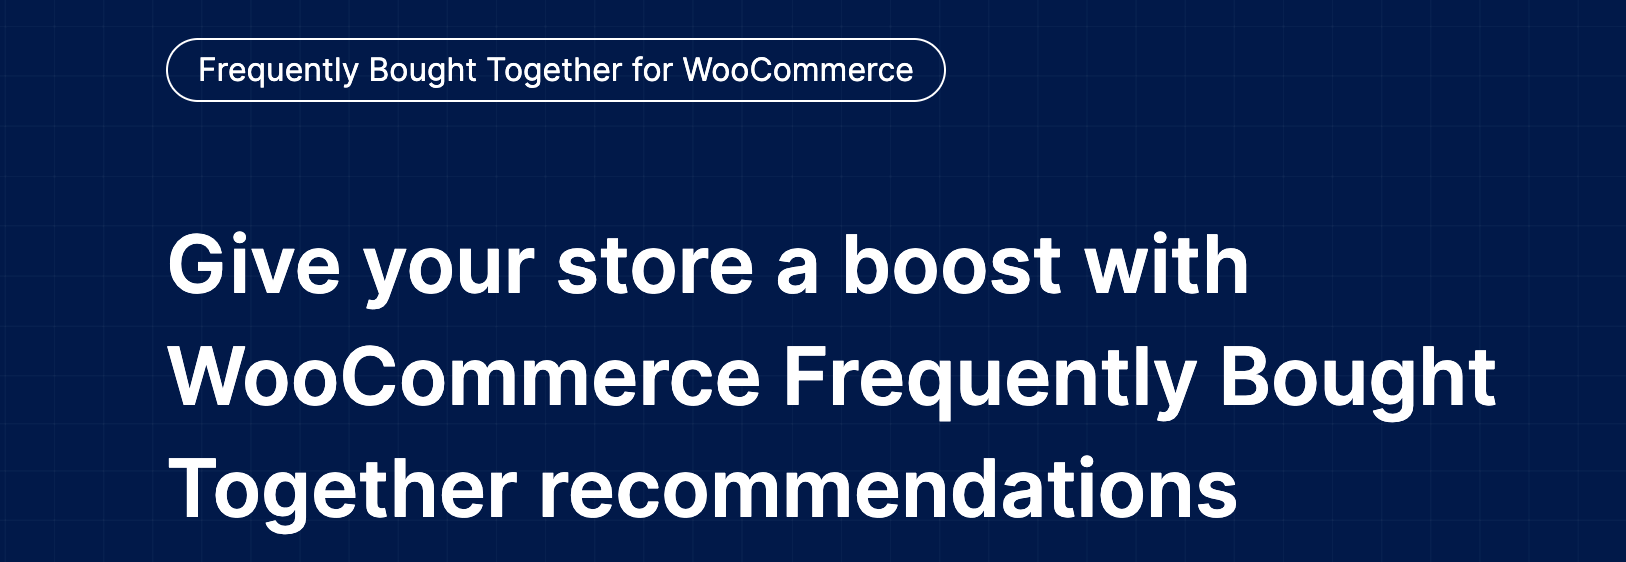 Frequently Bought Together for WooCommerce - Top 20+ Best Plugins to Increase Sales in WooCommerce – HostNamaste.com